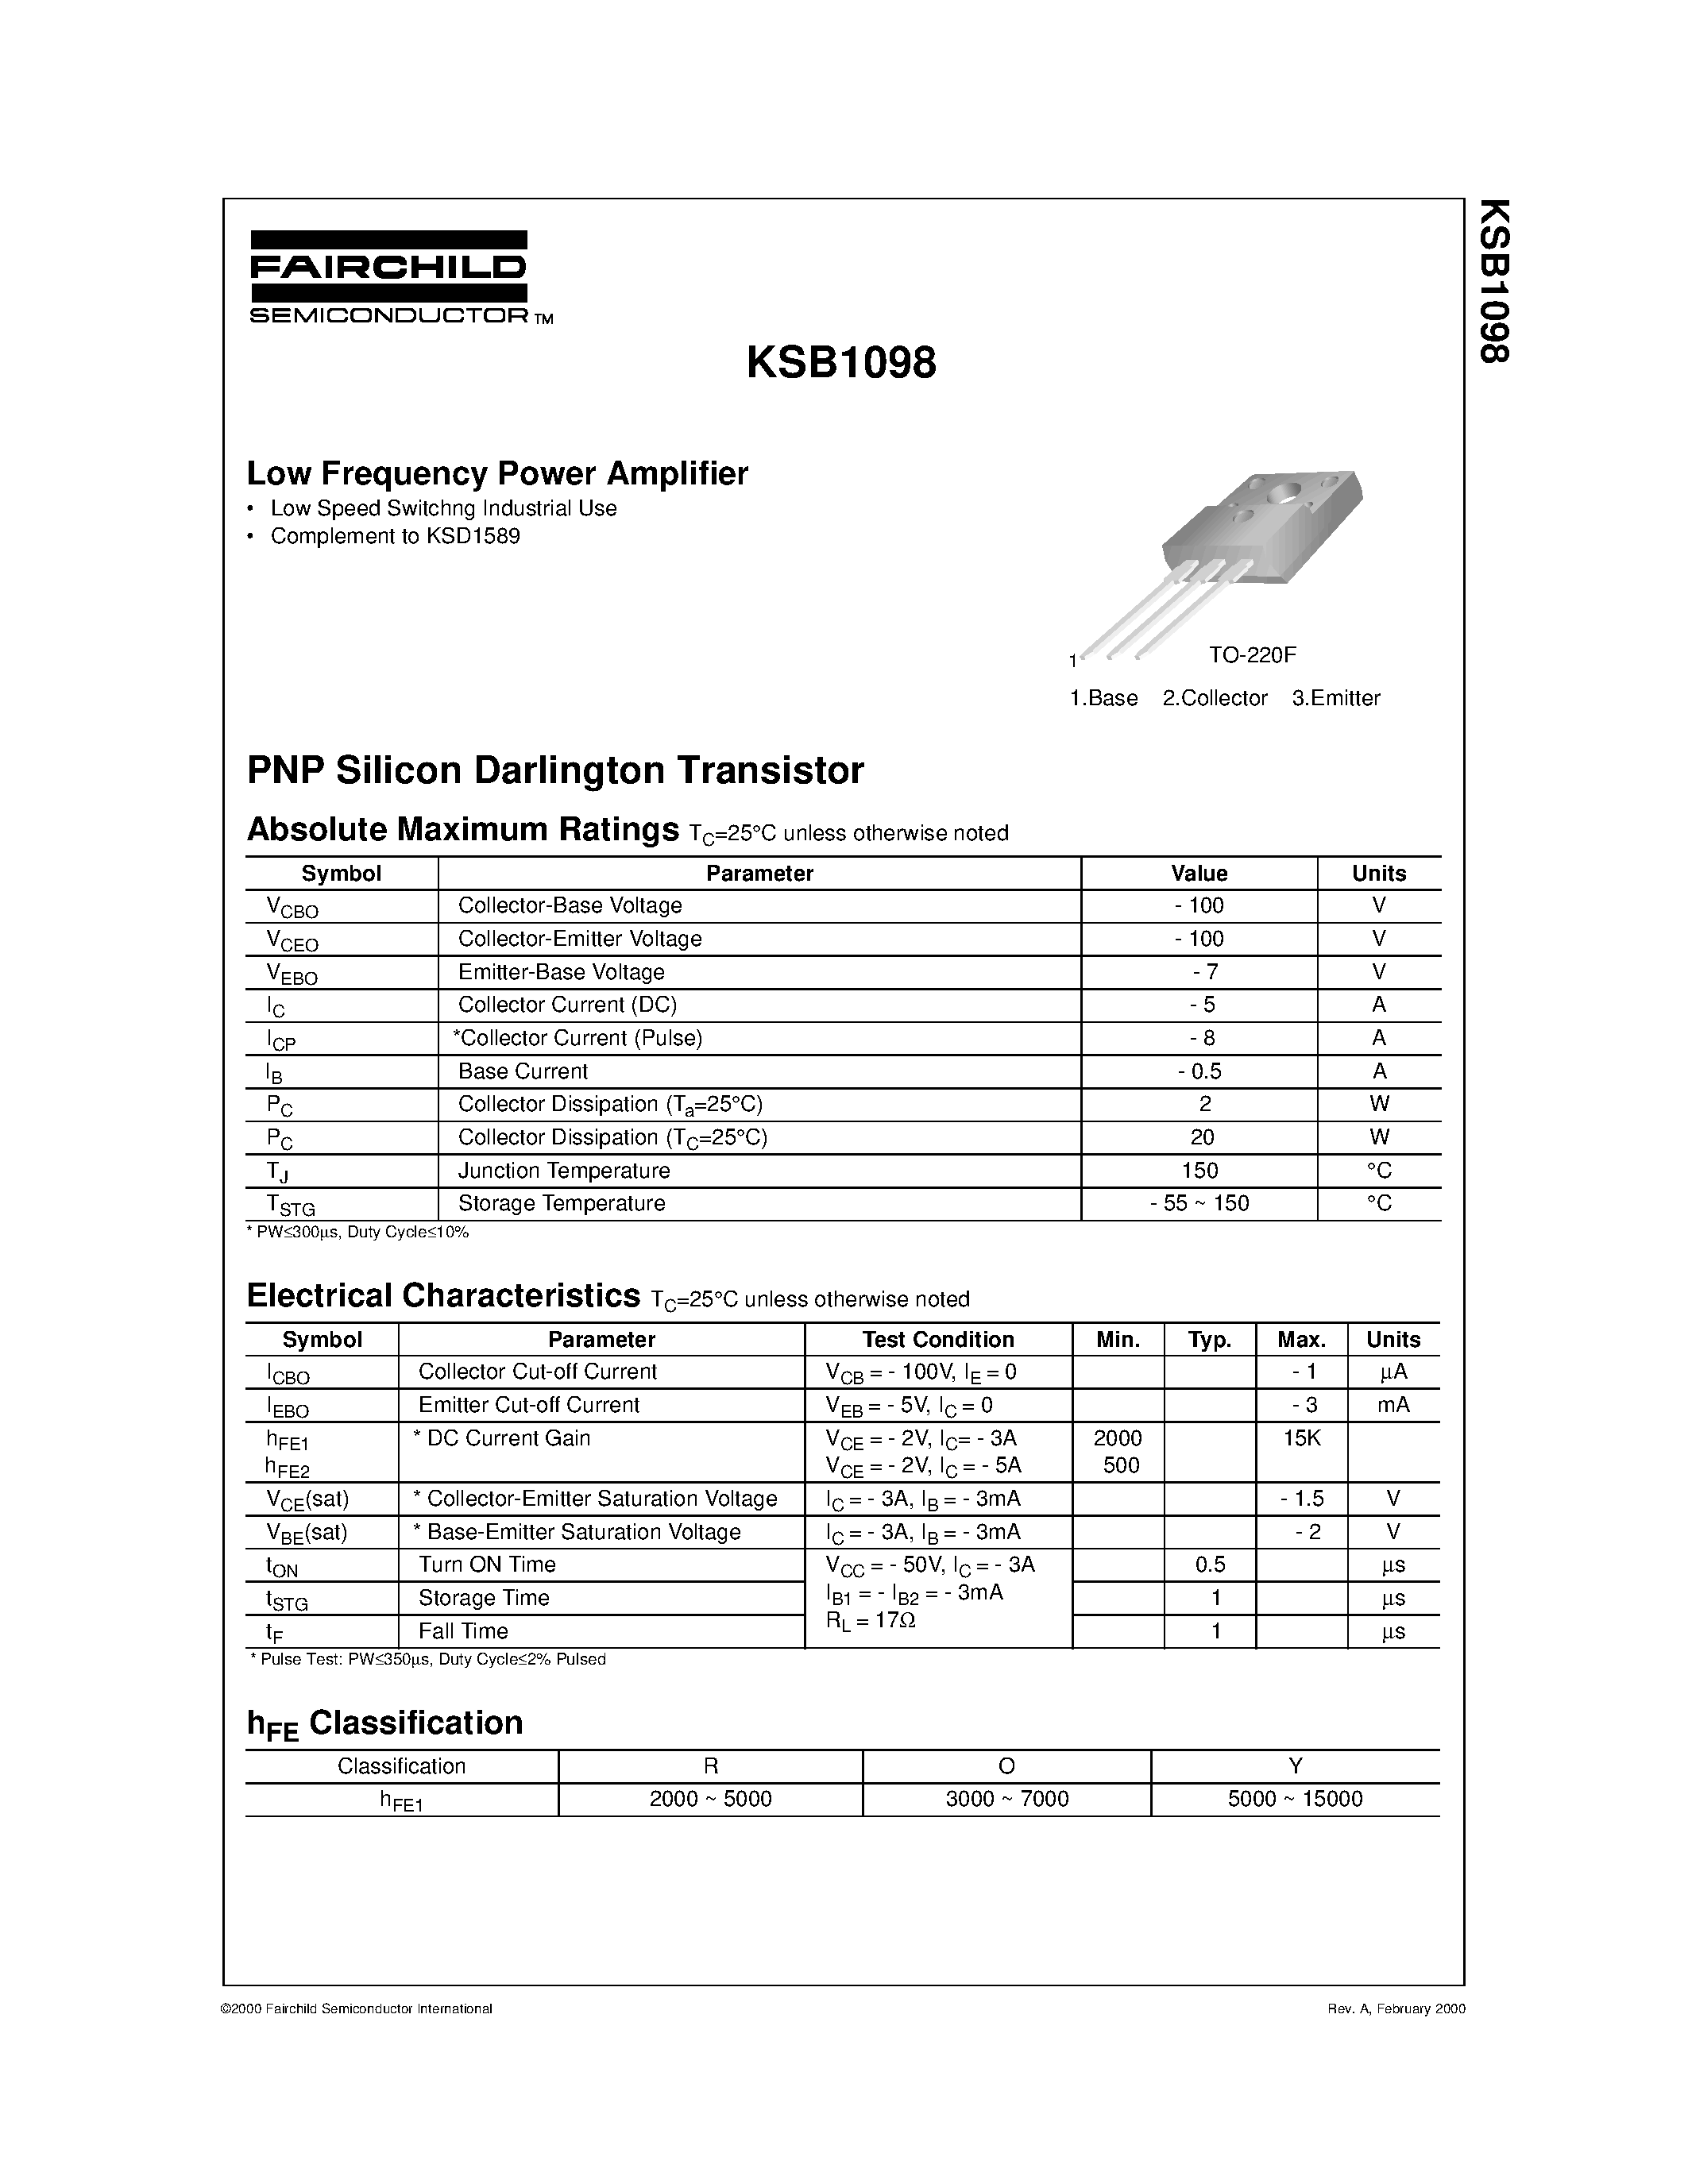 Datasheet KSB1098 - Low Frequency Power Amplifier page 1